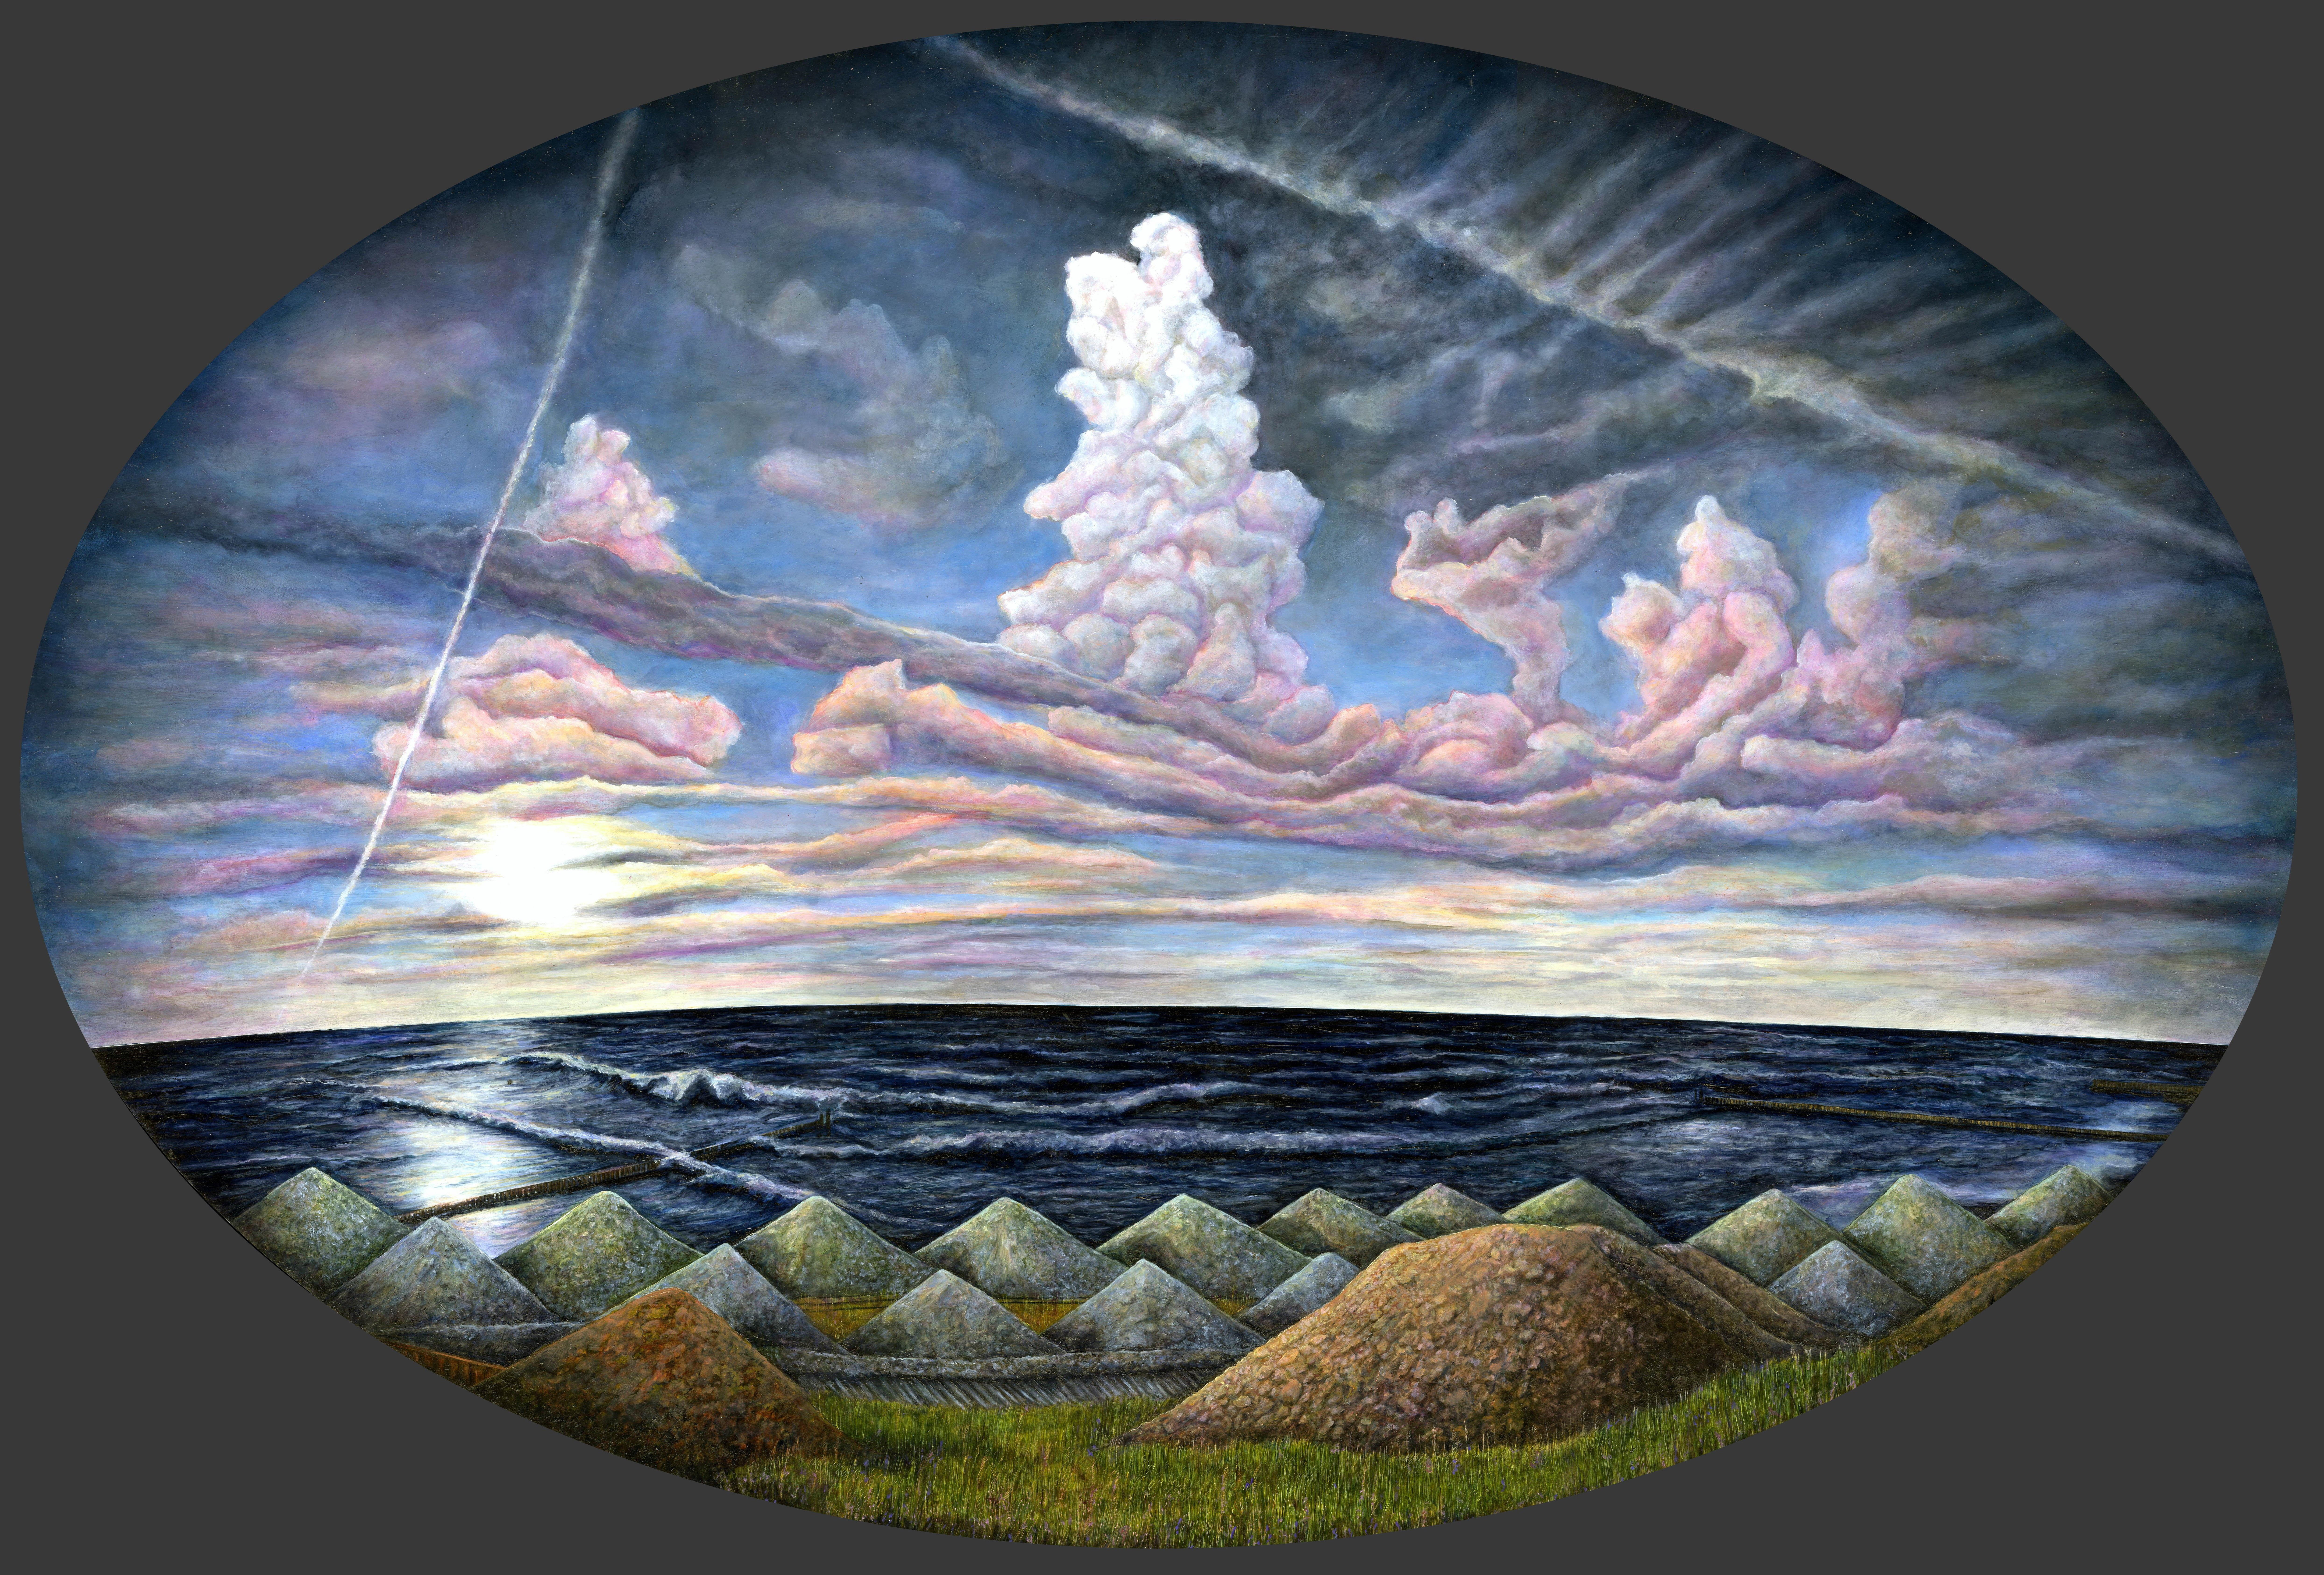 Homeward Bound, Surreal Landscape with Midnight Blue Water and Pink/Blue Sky. - Painting by Mark Bowers